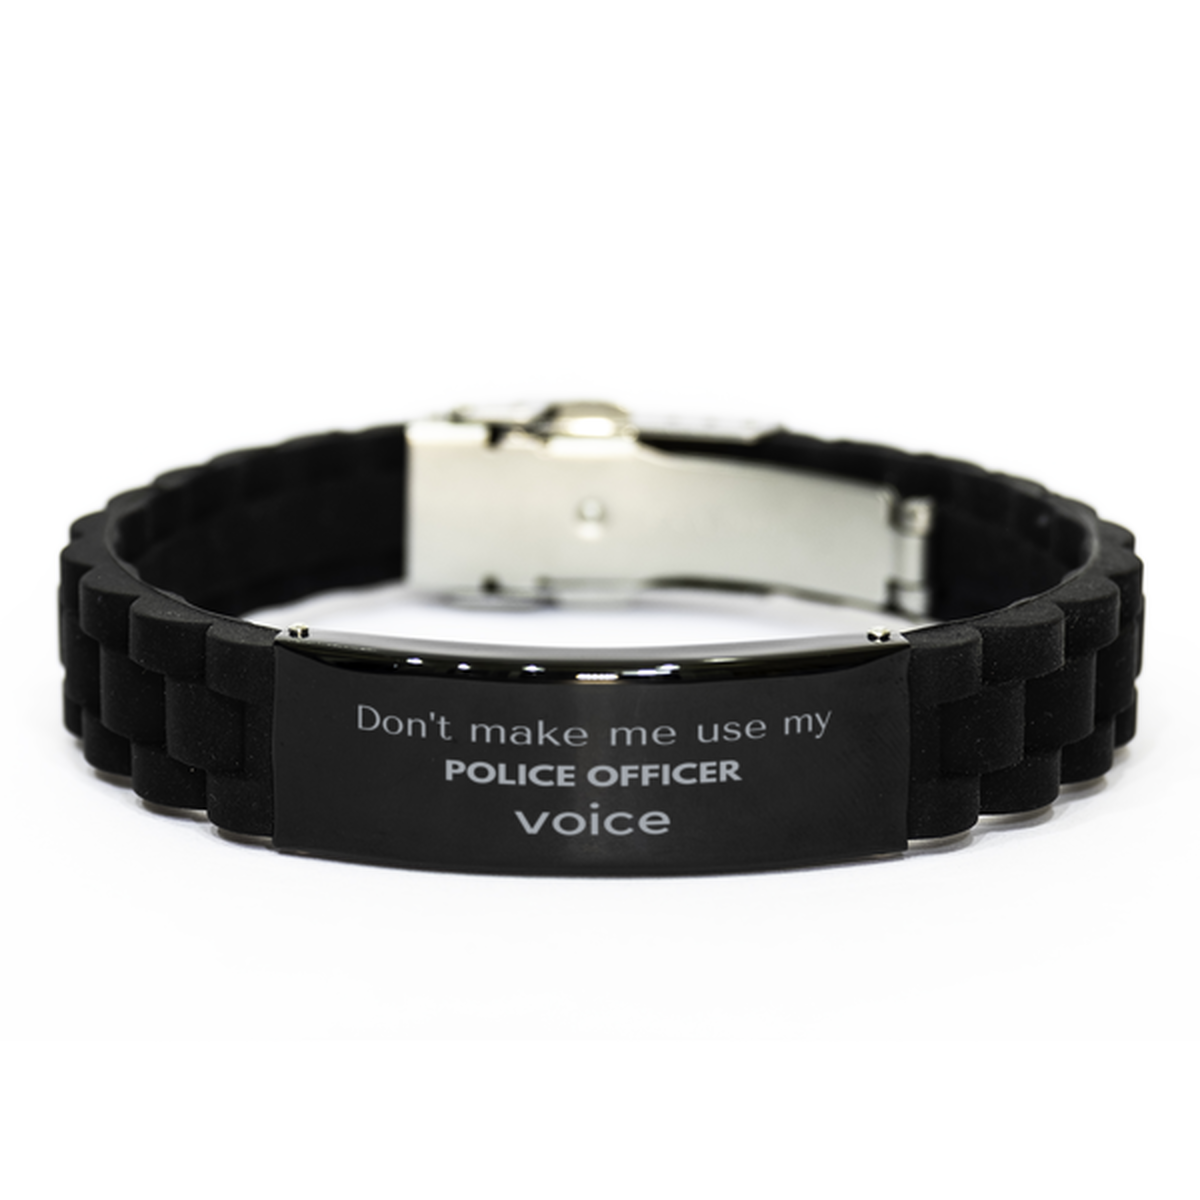 Don't make me use my Police Officer voice, Sarcasm Police Officer Gifts, Christmas Police Officer Black Glidelock Clasp Bracelet Birthday Unique Gifts For Police Officer Coworkers, Men, Women, Colleague, Friends